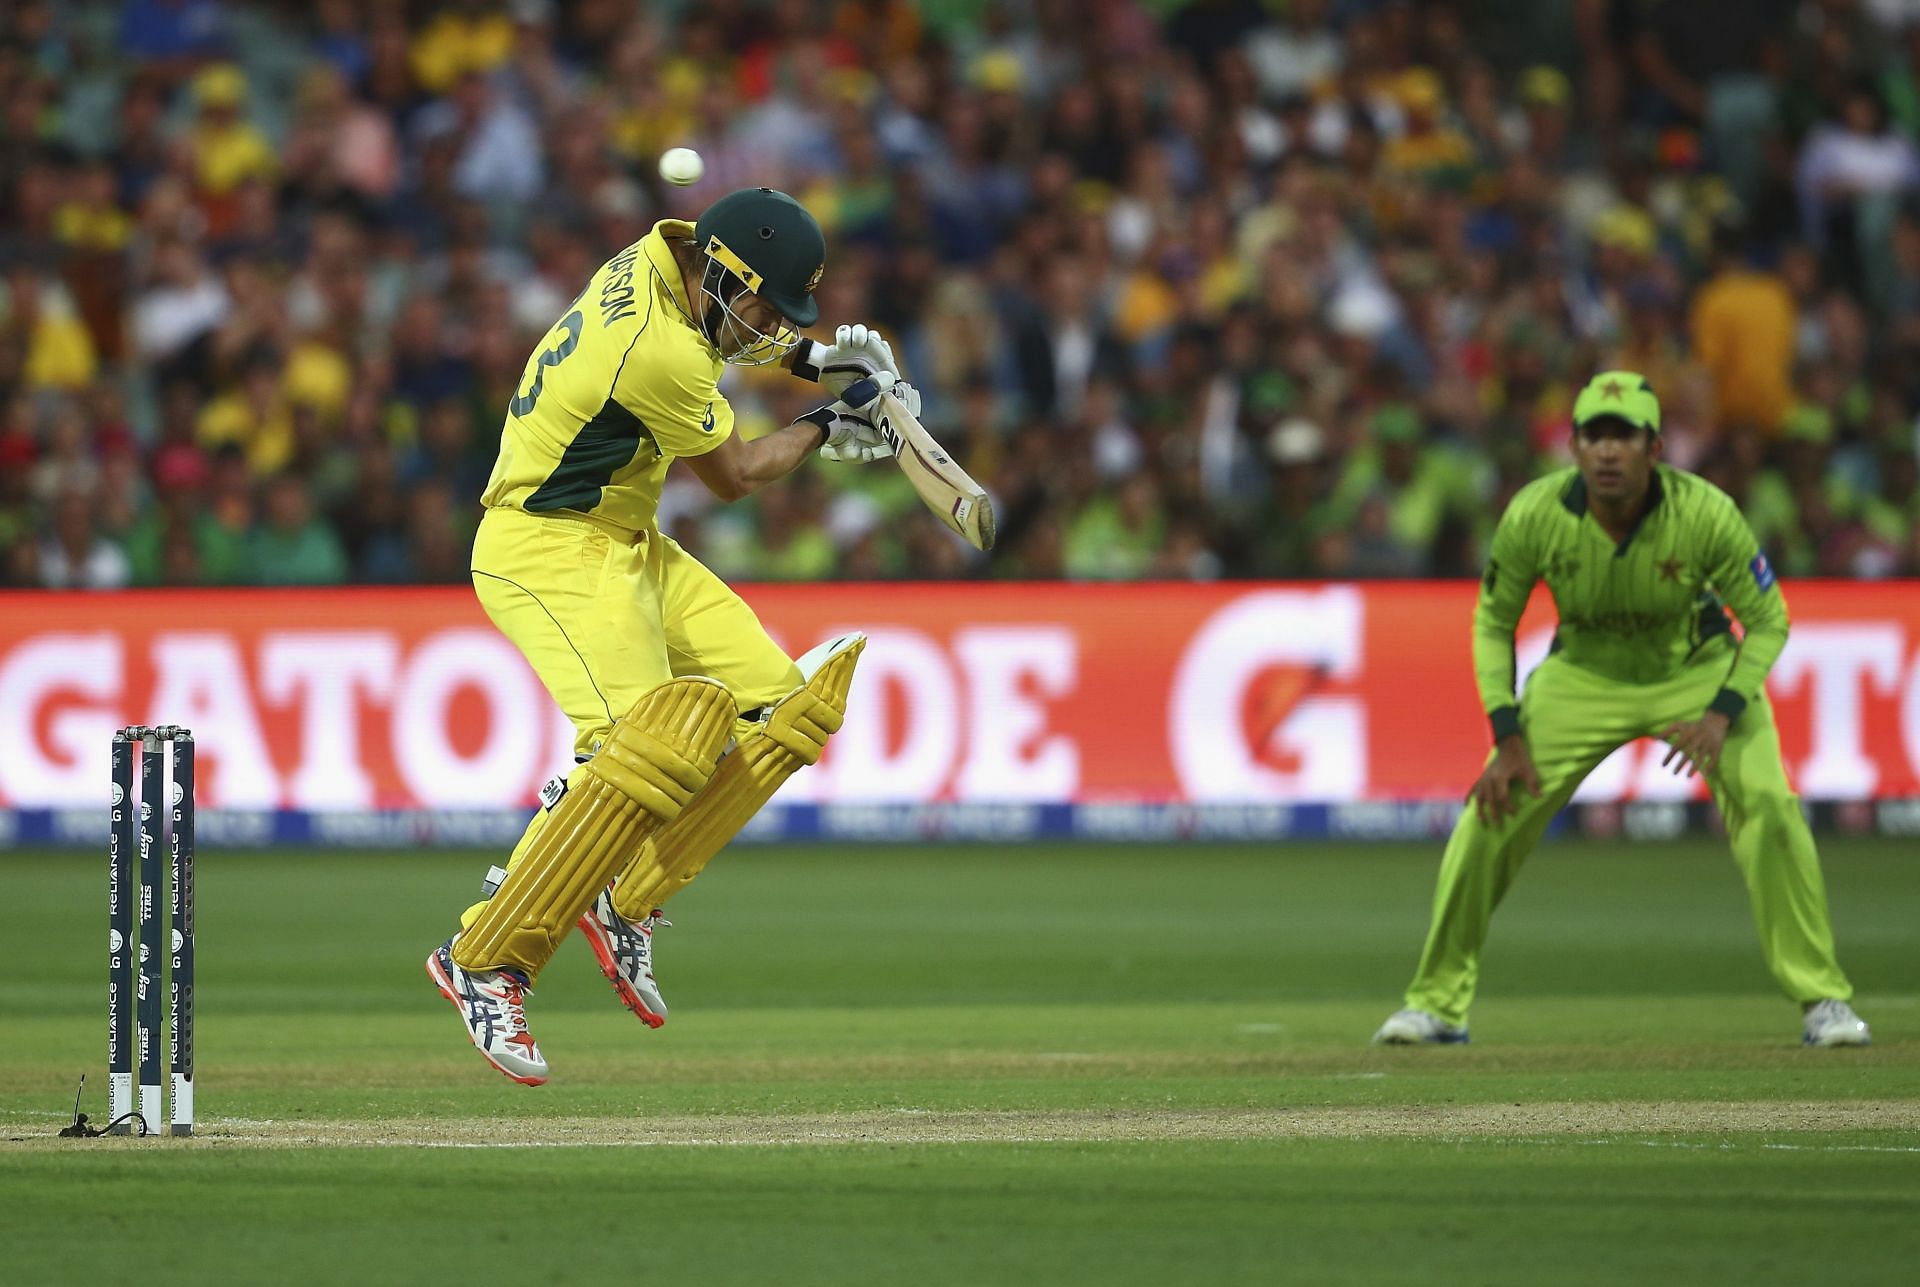 The Pakistan pacer bowled a barrage of short balls at Shane Watson. (Pic: Getty Images)